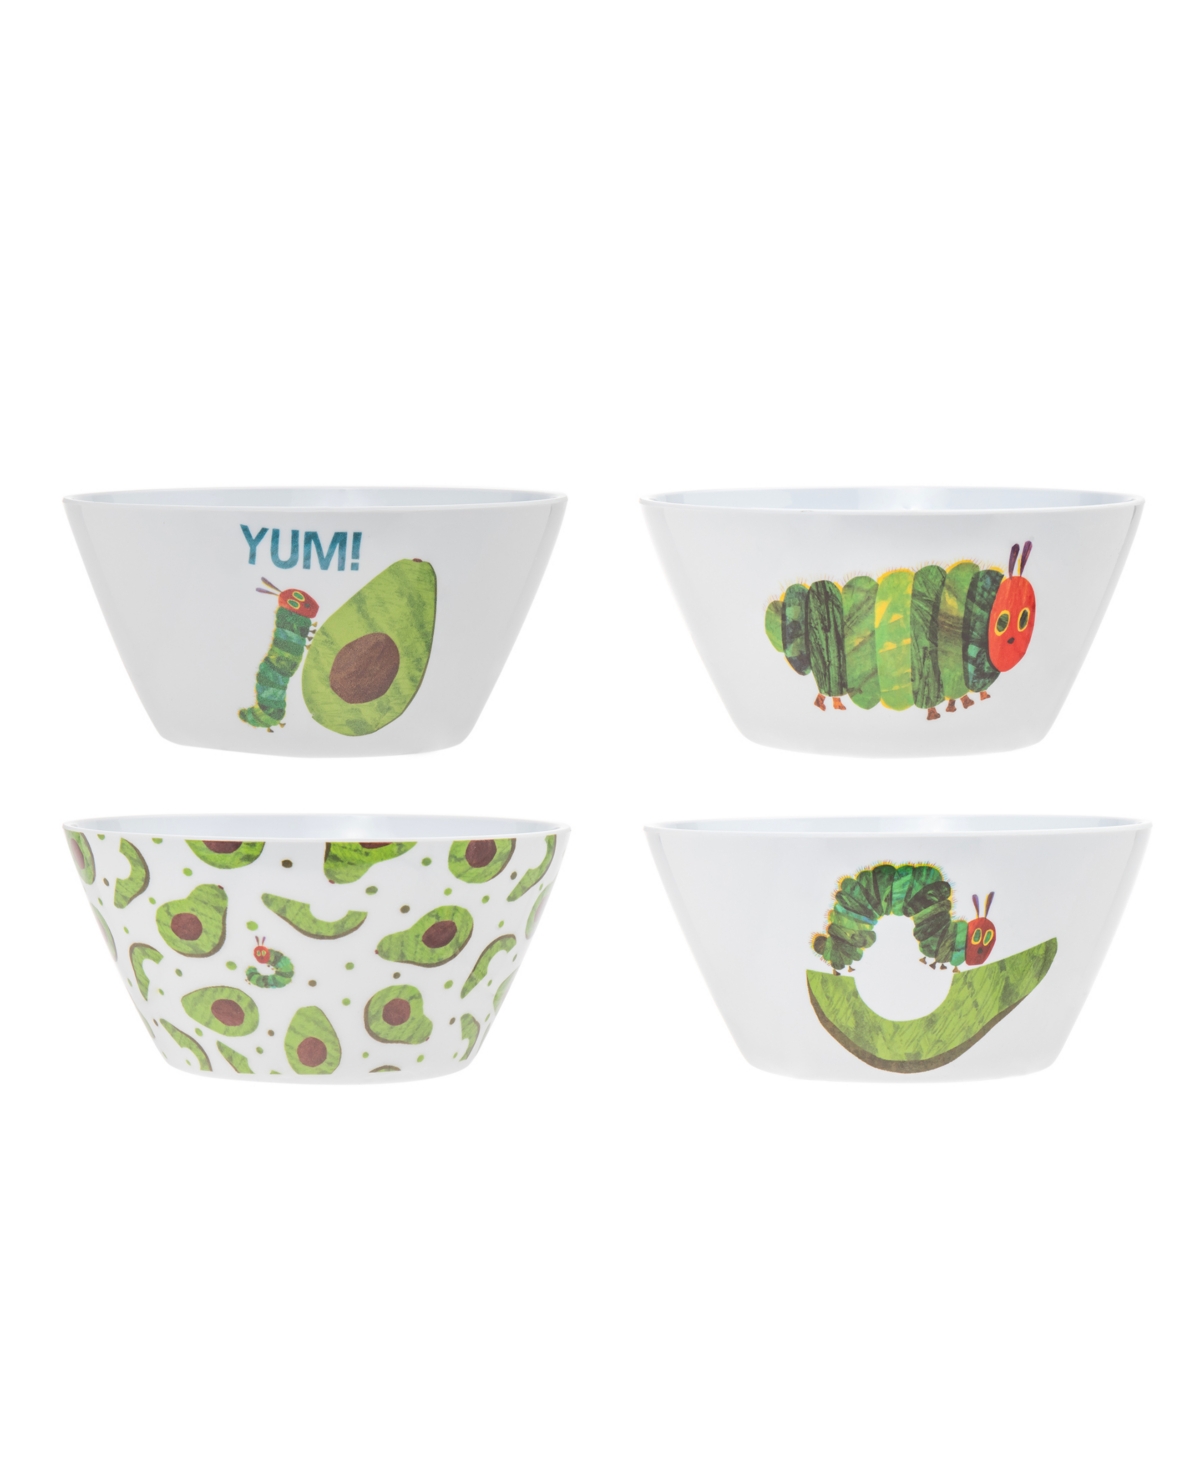 The World of Eric Carle, The Very Hungry Caterpillar Avocado Cereal Bowl Set of 4 - White